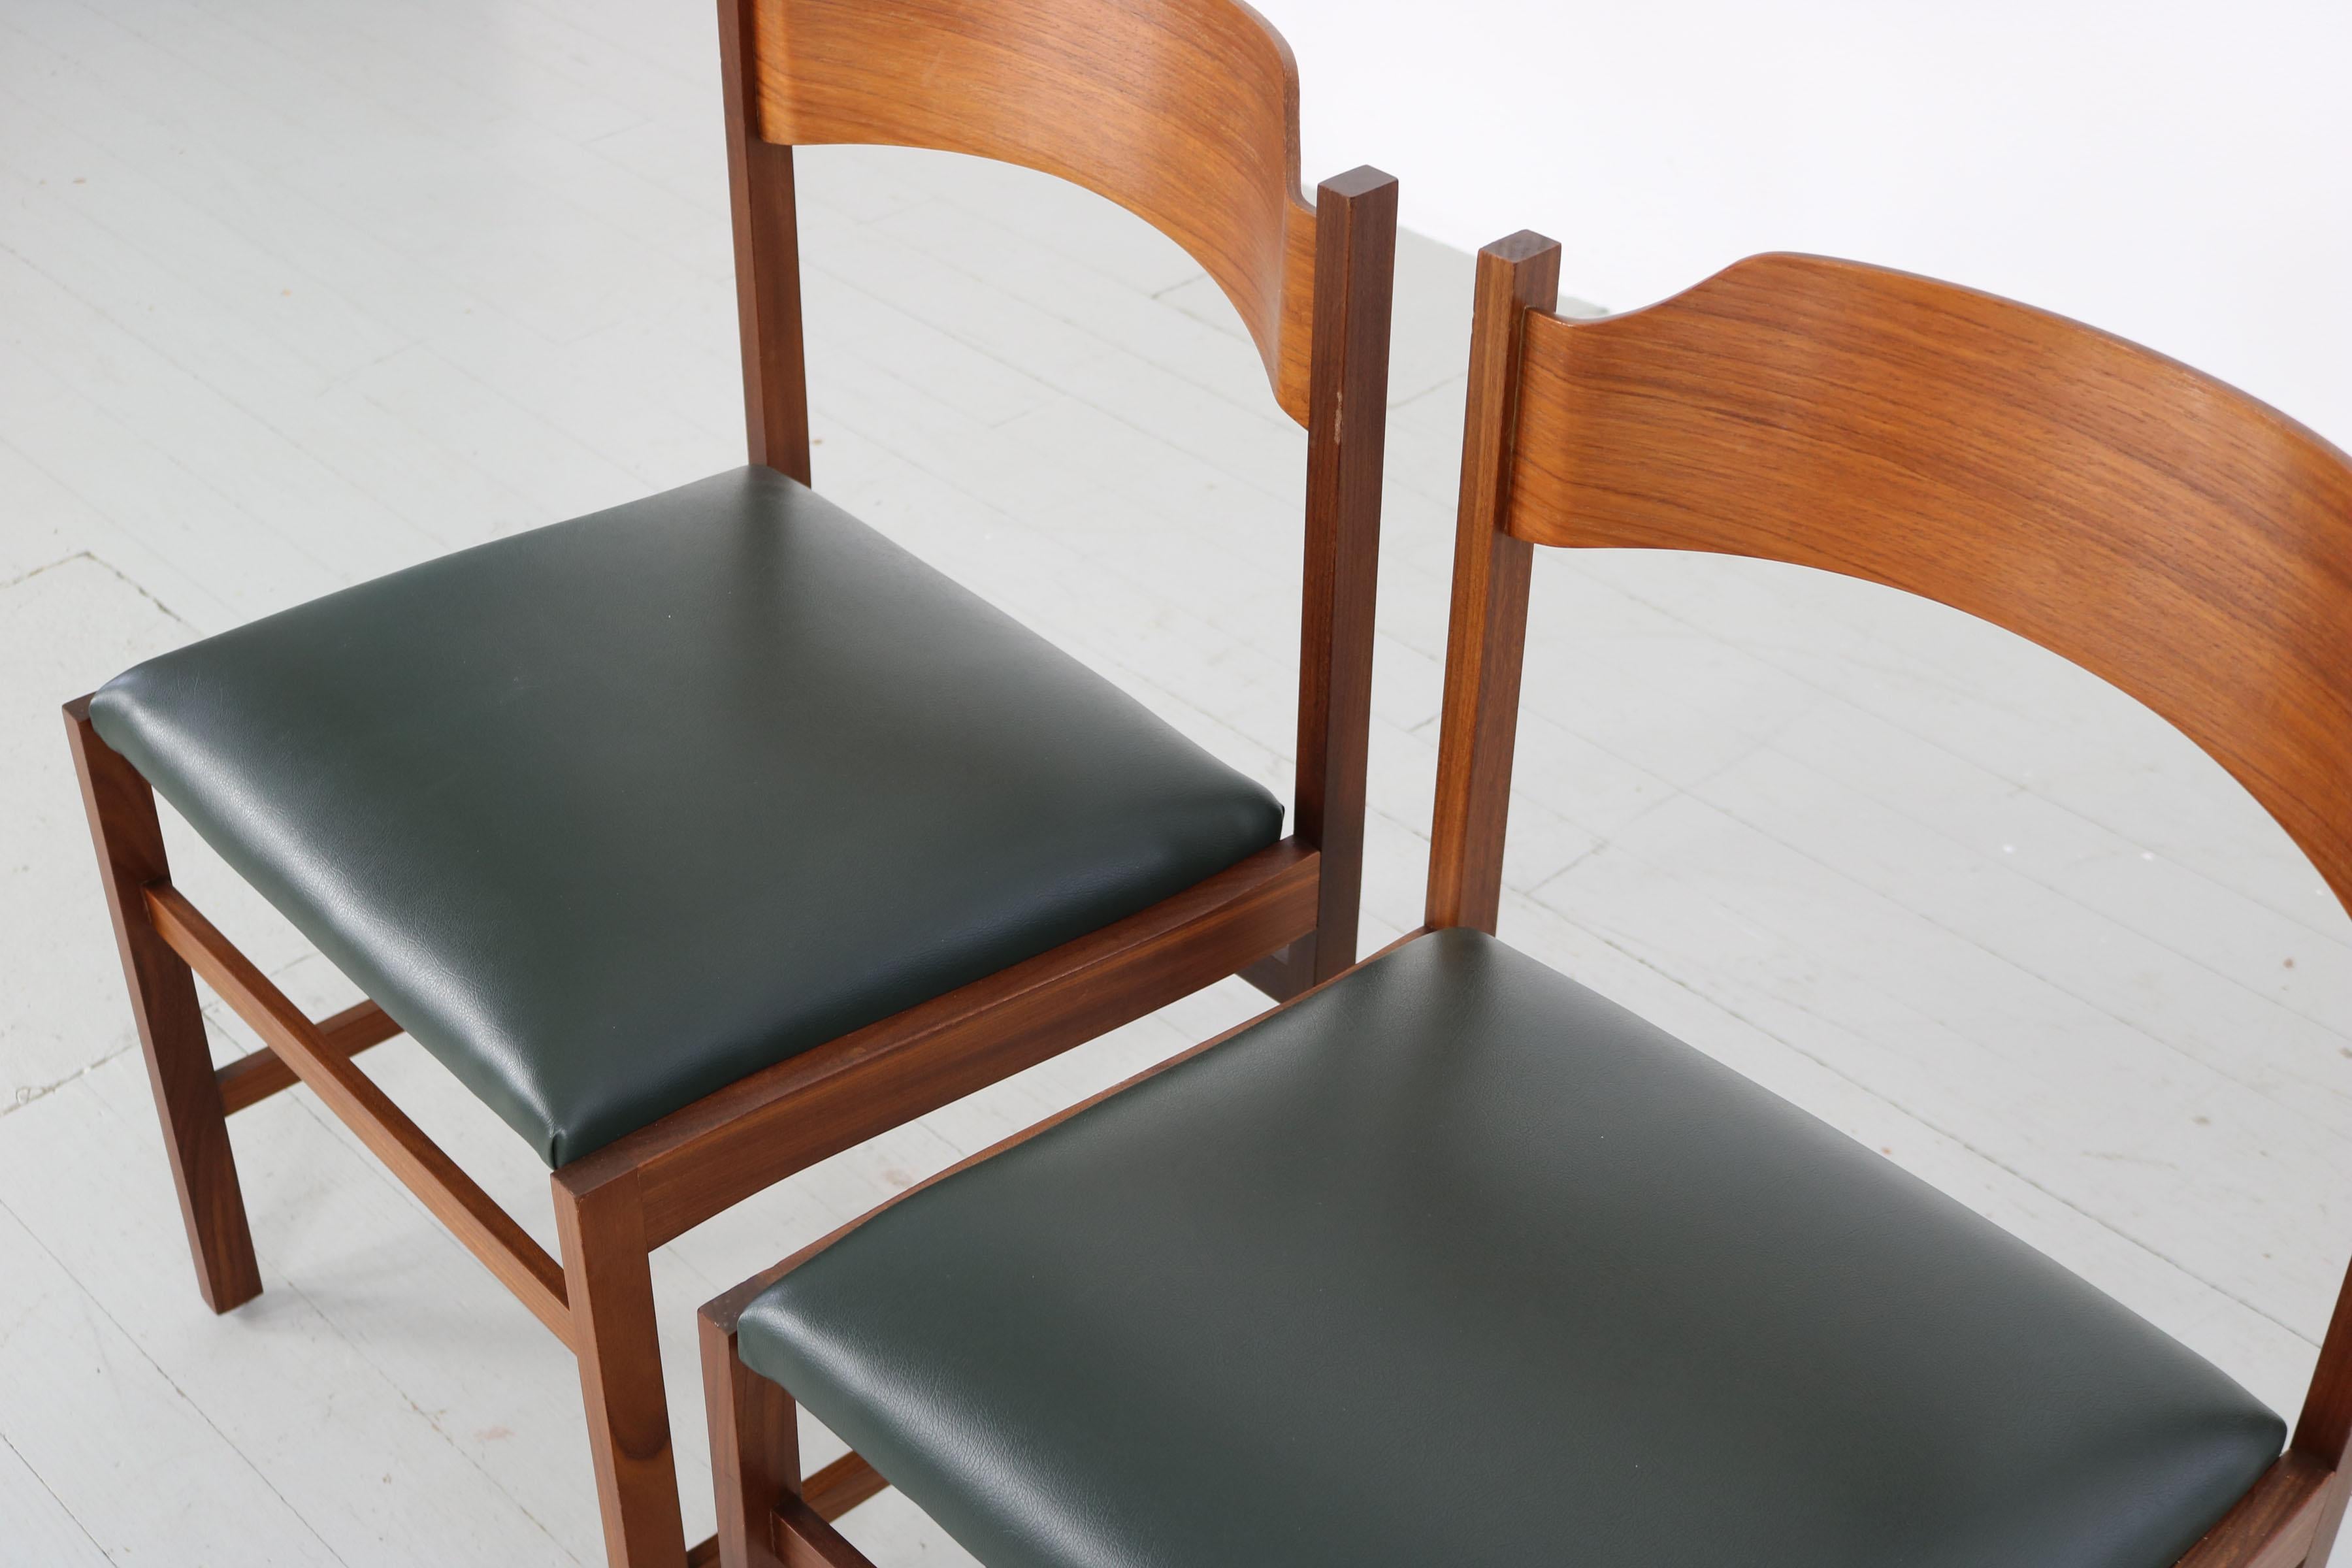 Set of 3 Solid Wooden Chairs with Dark Green Leatherette Upholstery, 1960s For Sale 11